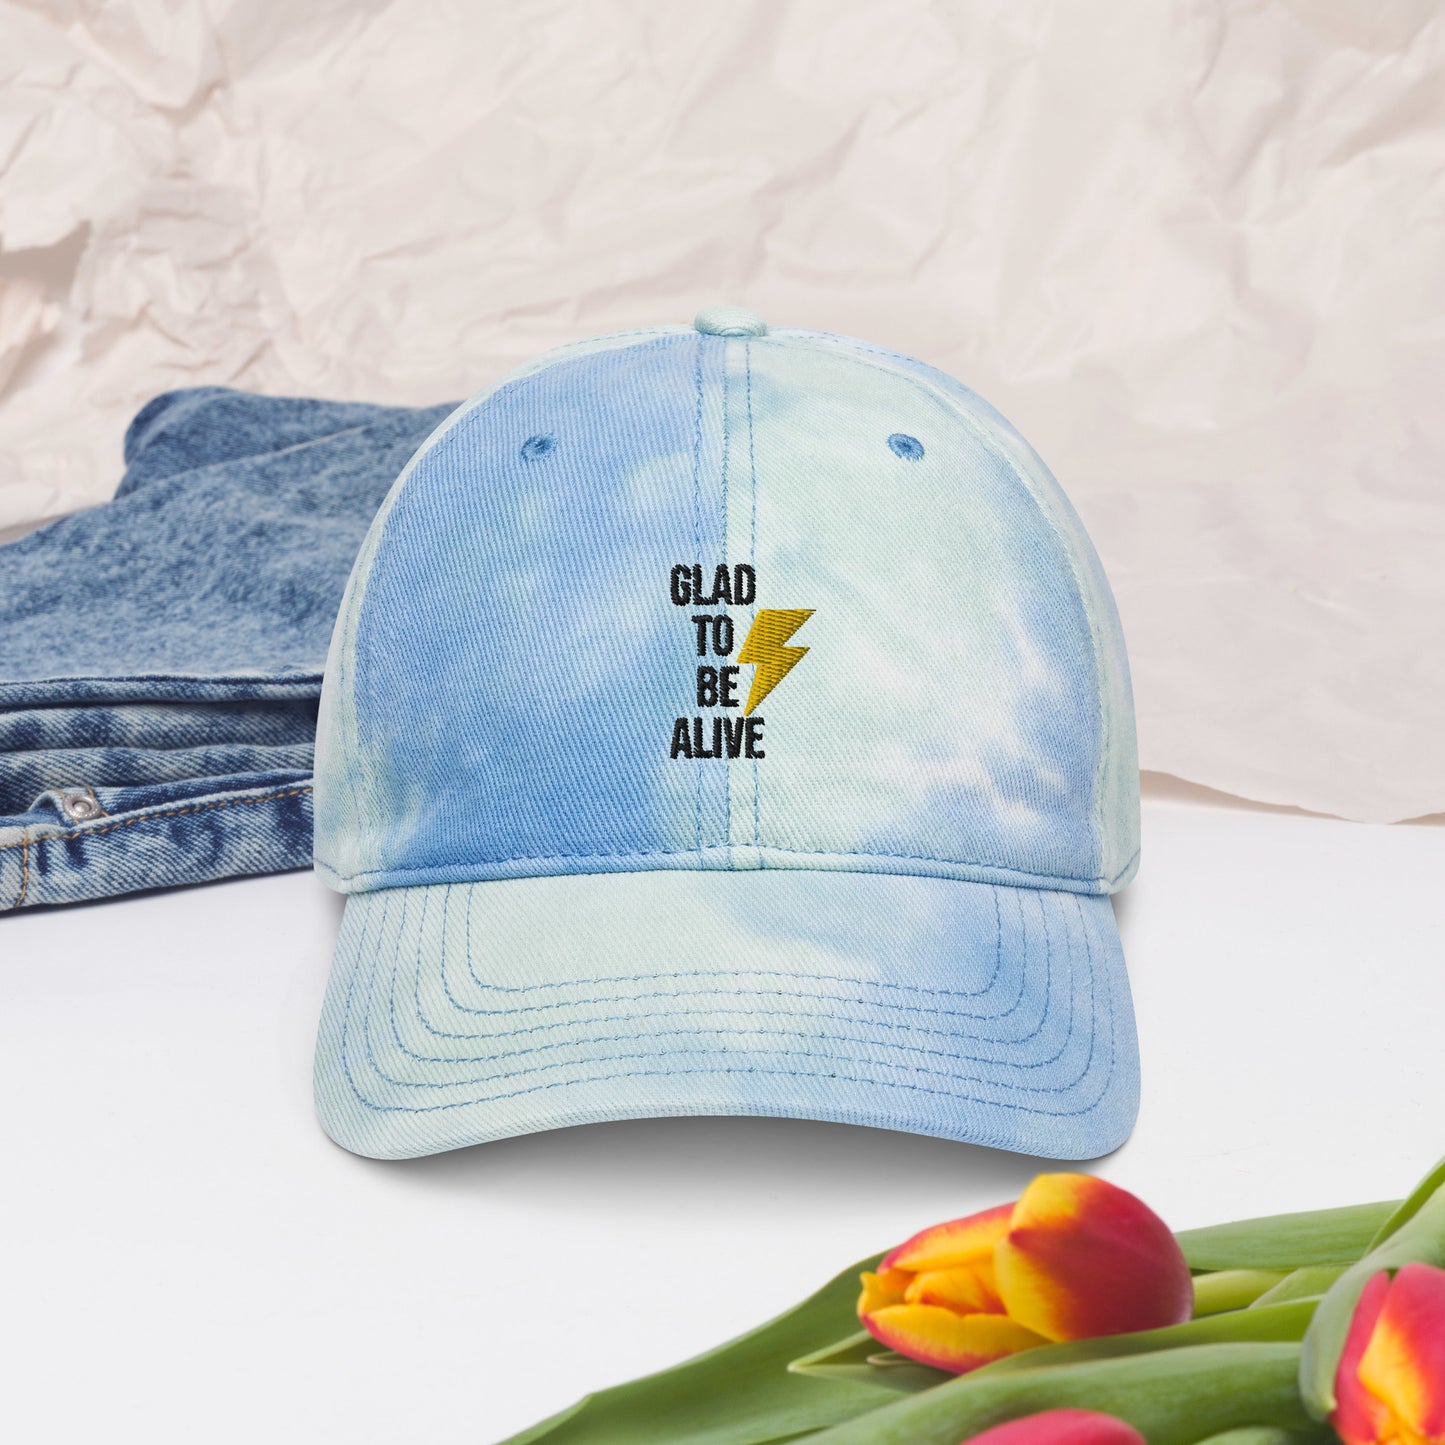 Glad To Be Alive (Tie dye hat)